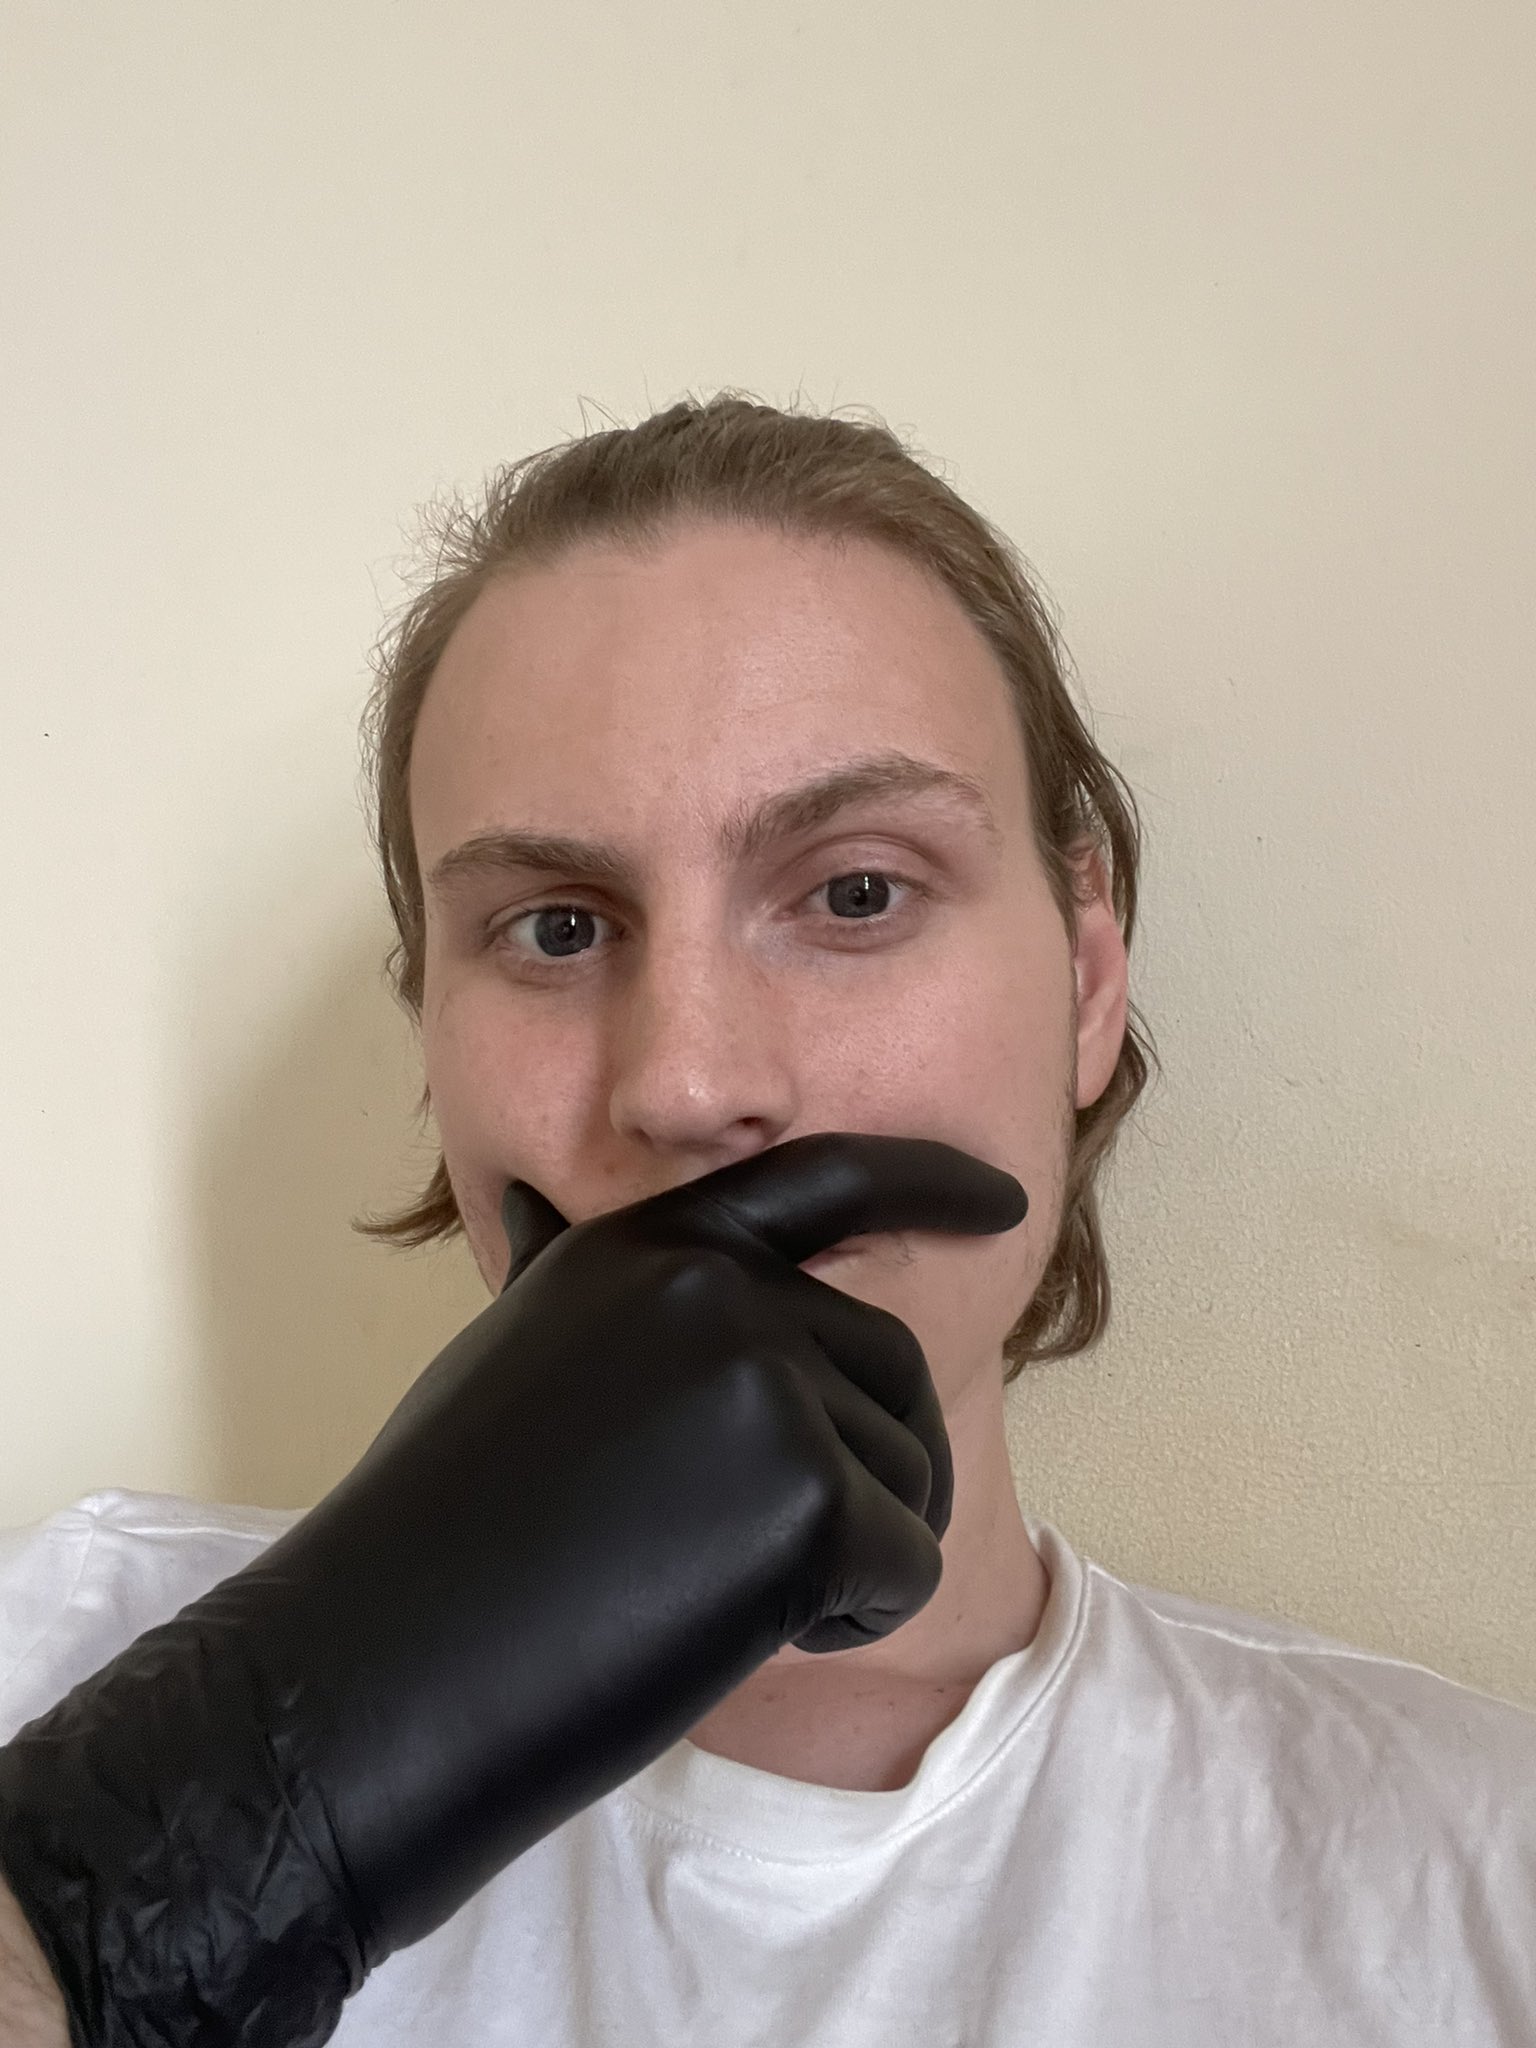 Leatherladd On Twitter Latex Glove Hand Gag For All You Gag Lovers 😈 